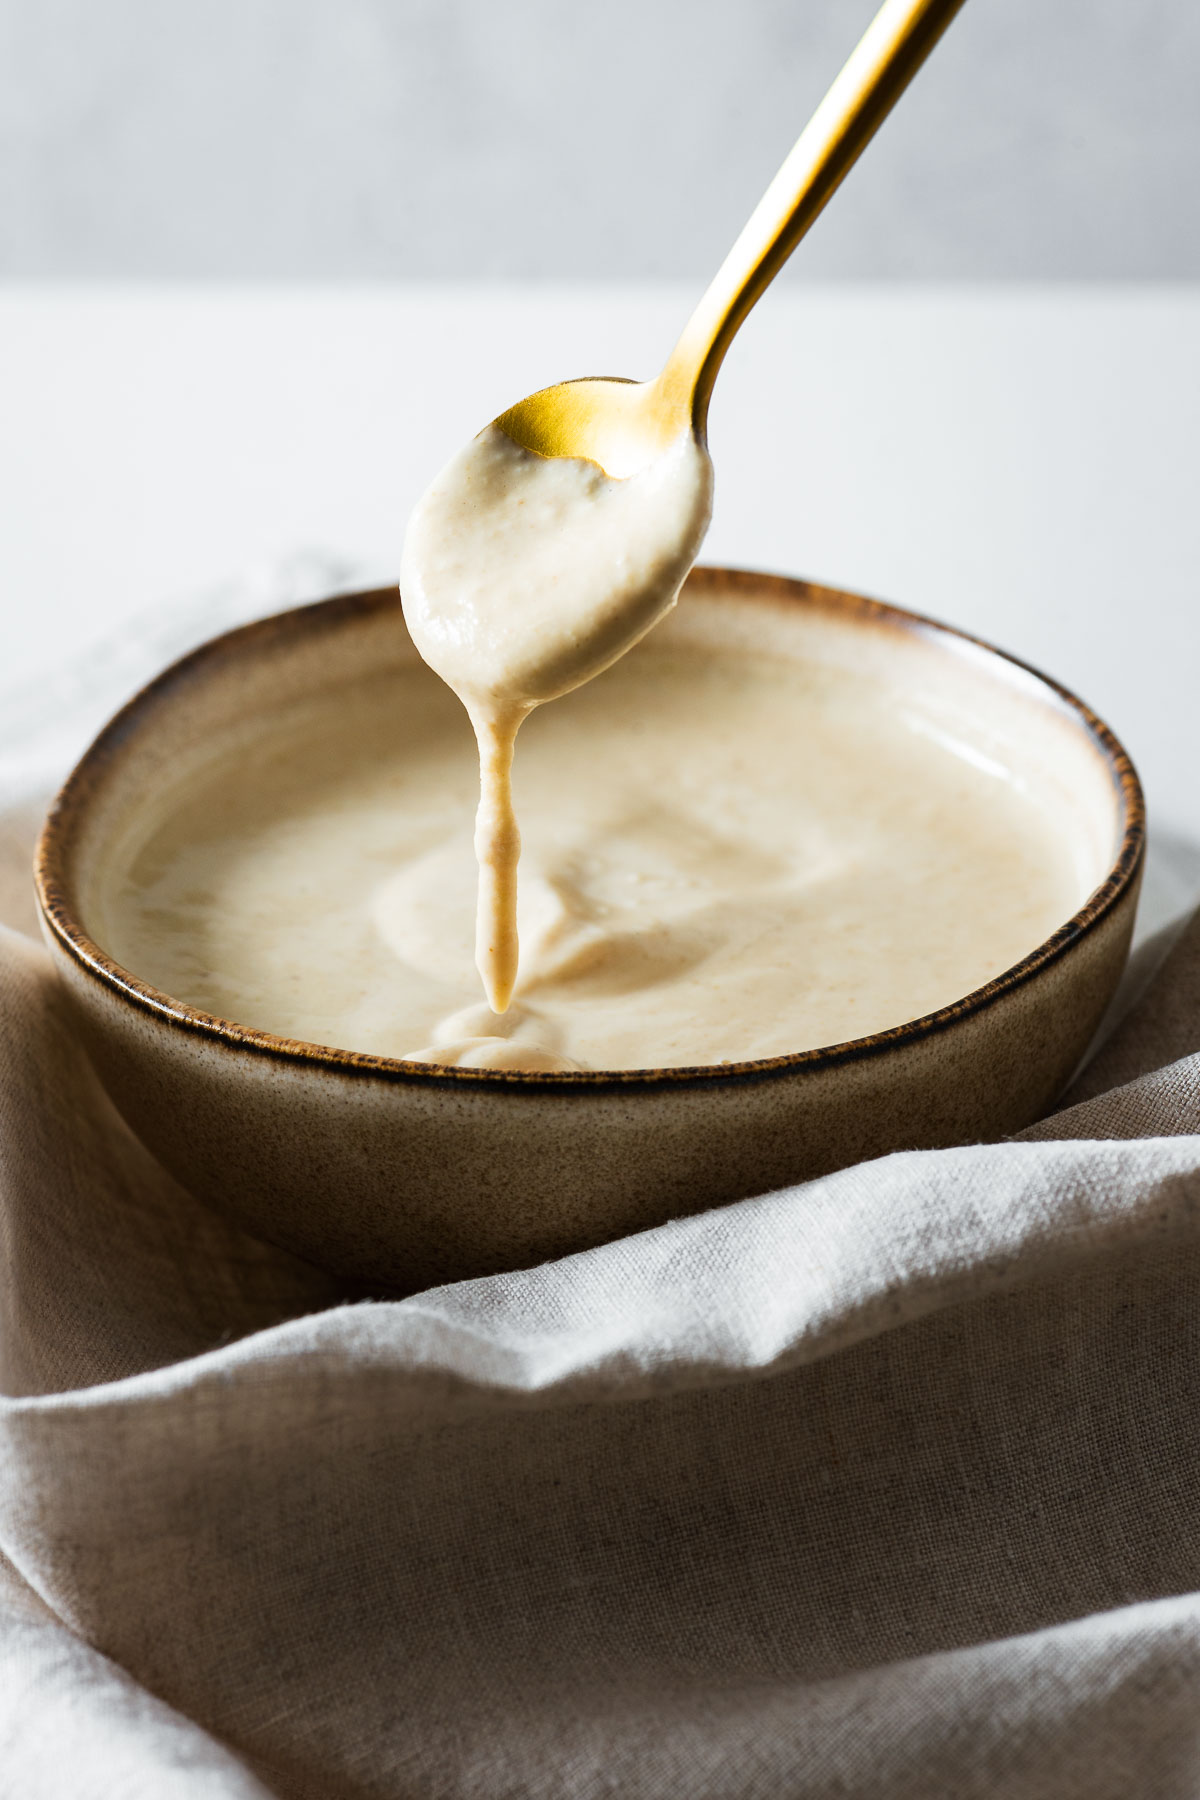 A close-up of a creamy lemon tahini sauce in a ceramic bowl with a golden spoon.